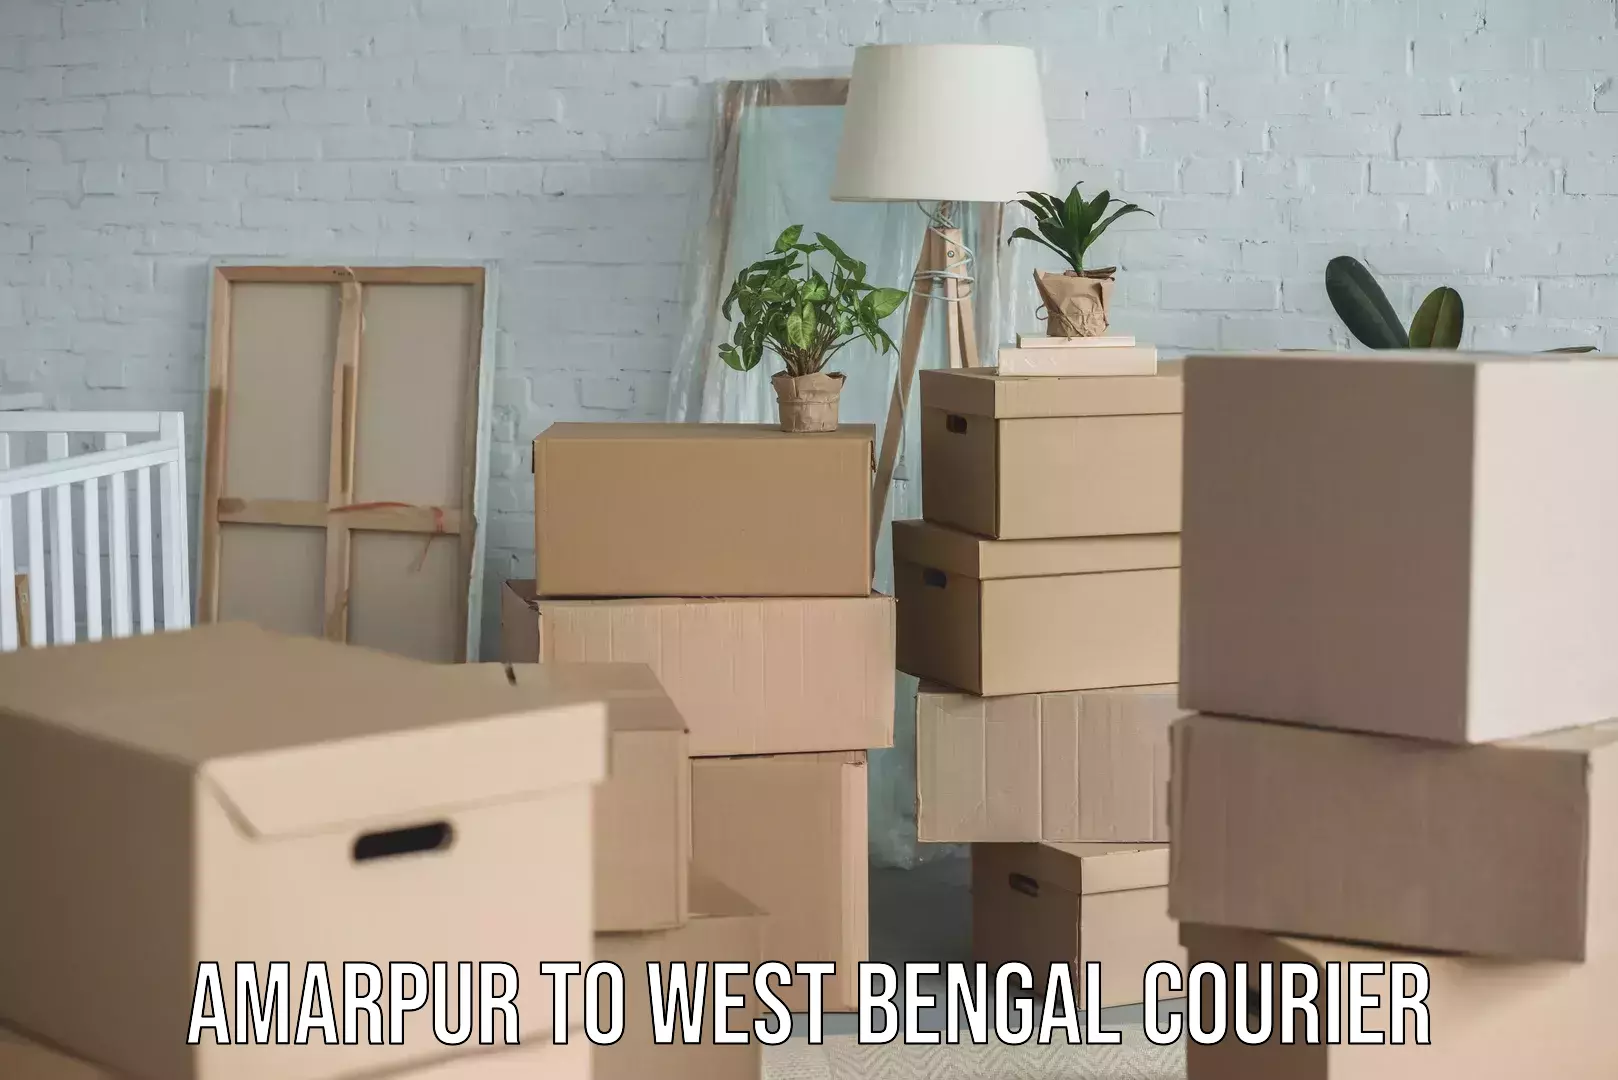 Overnight delivery services in Amarpur to West Bengal